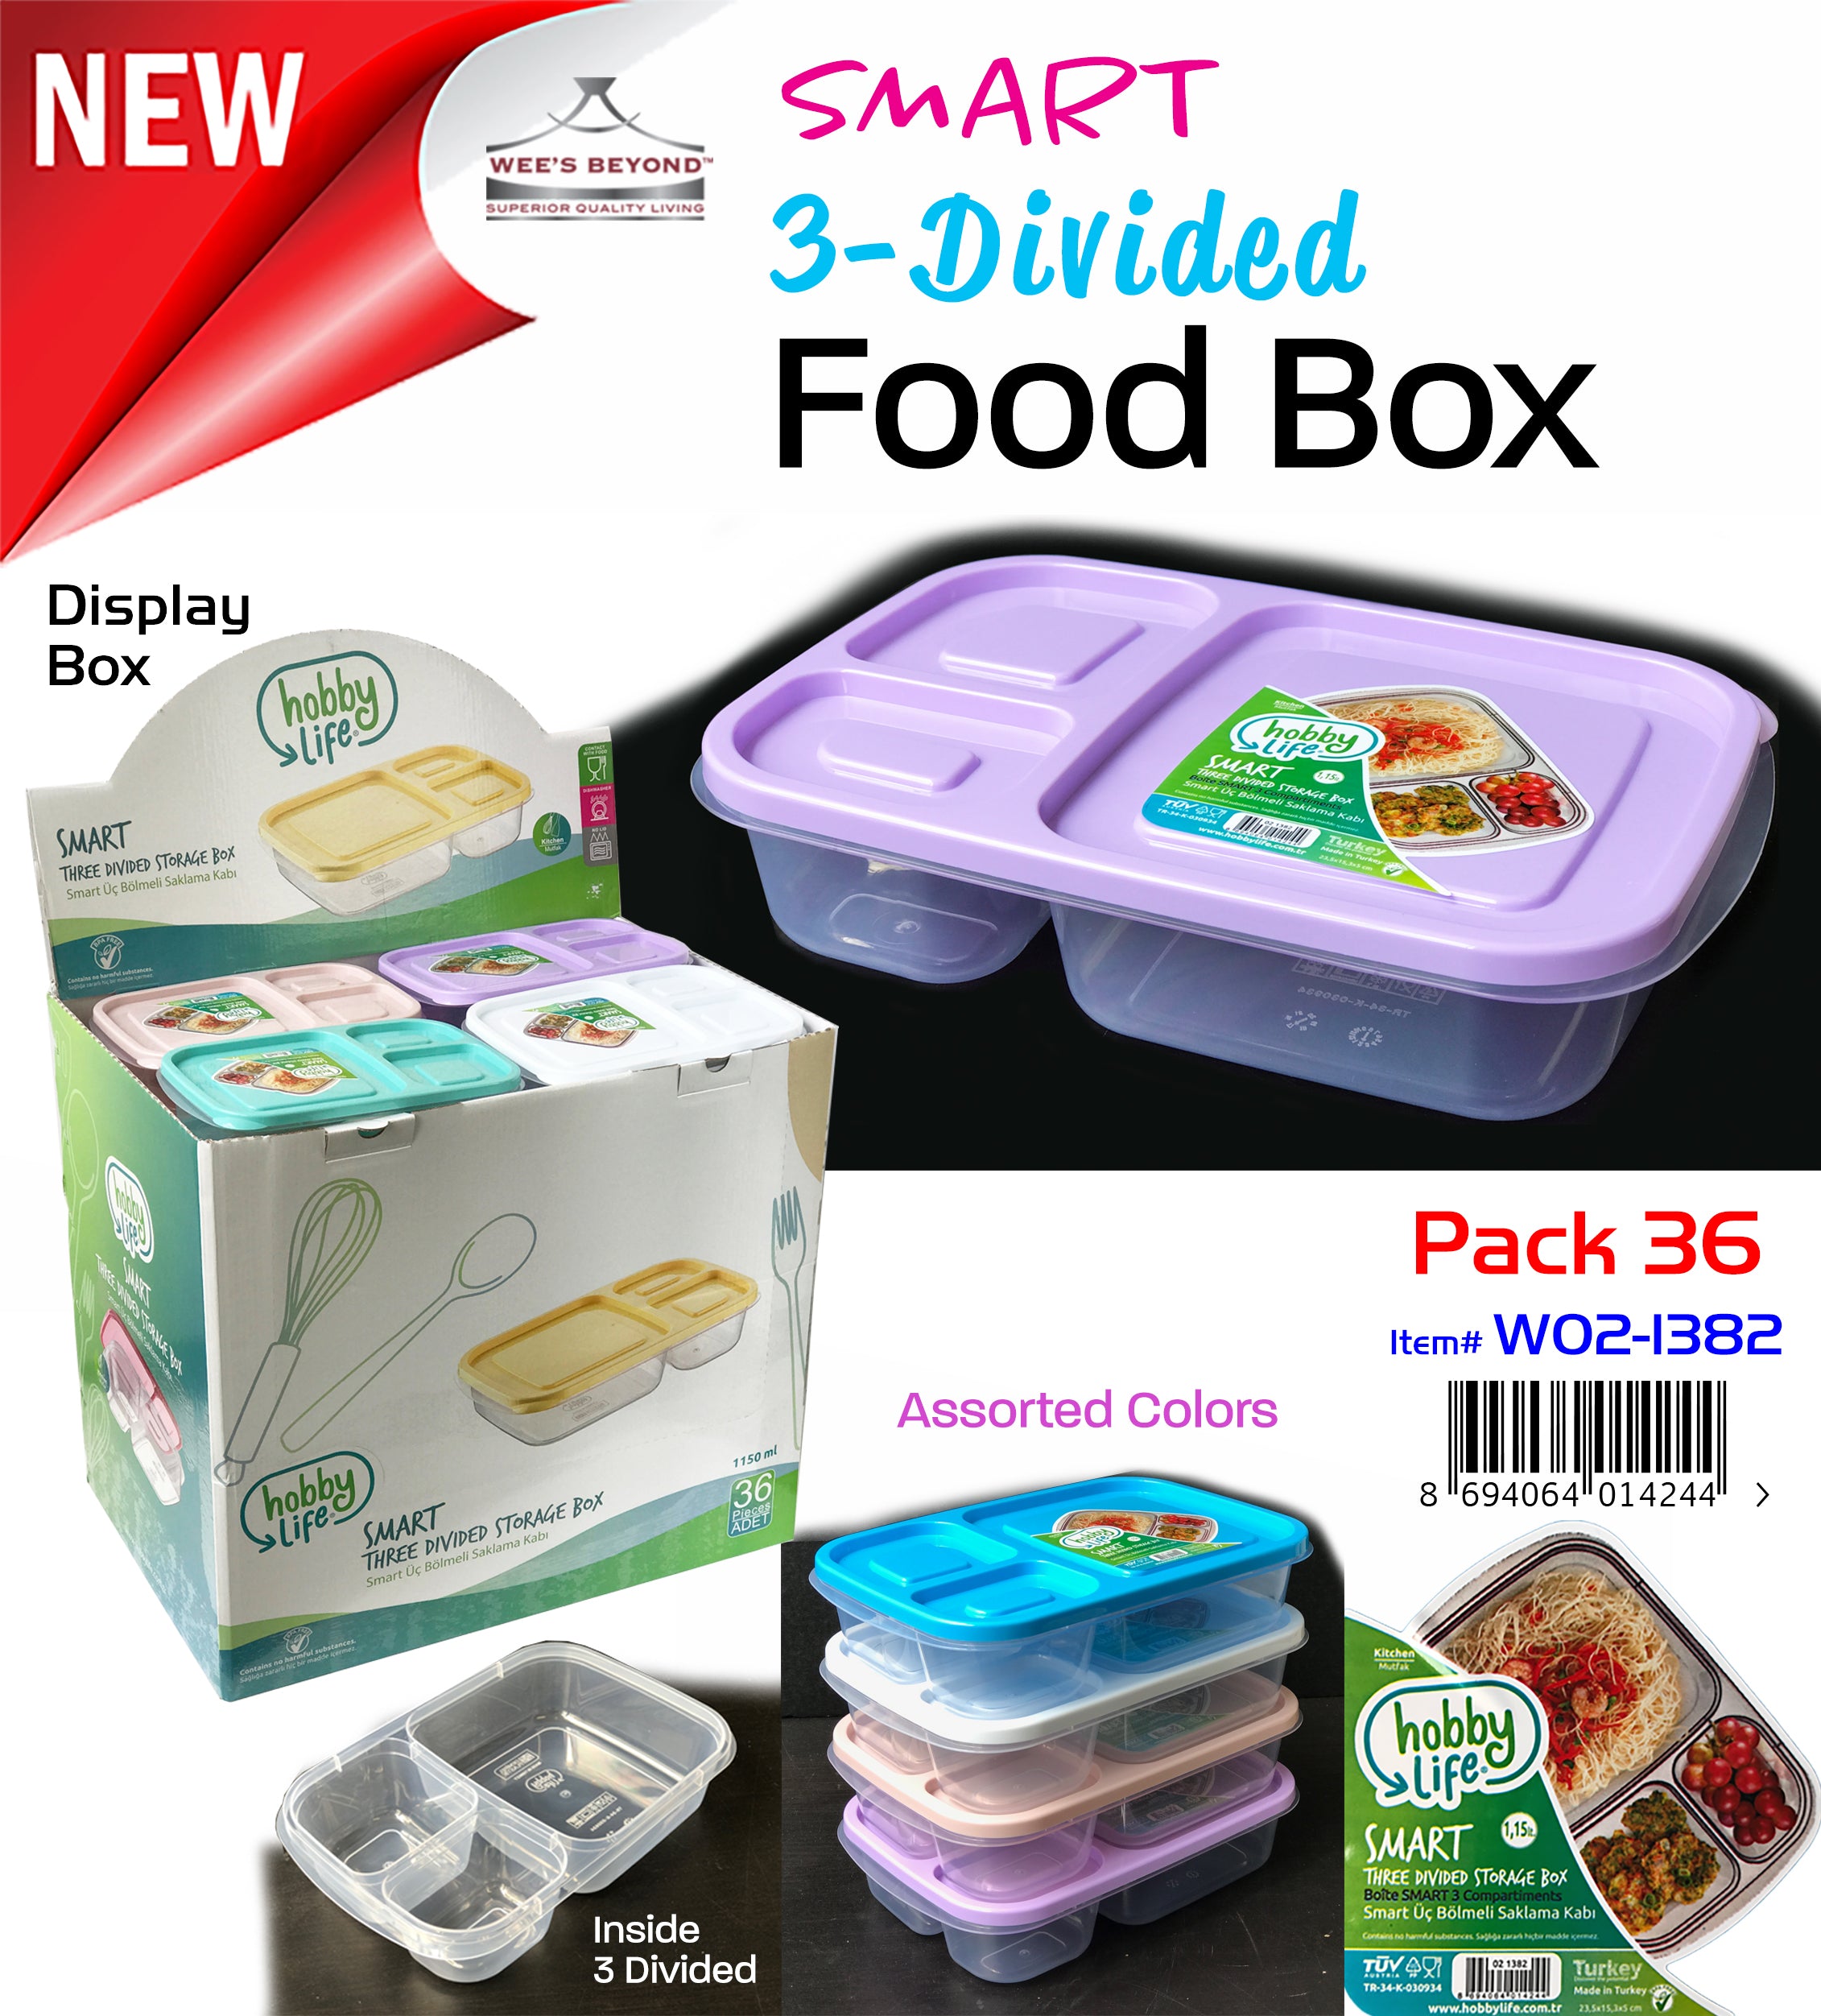 W02-1383 Smart 3-Divided Food Storage Box 3 pcs Pack (case pack 12